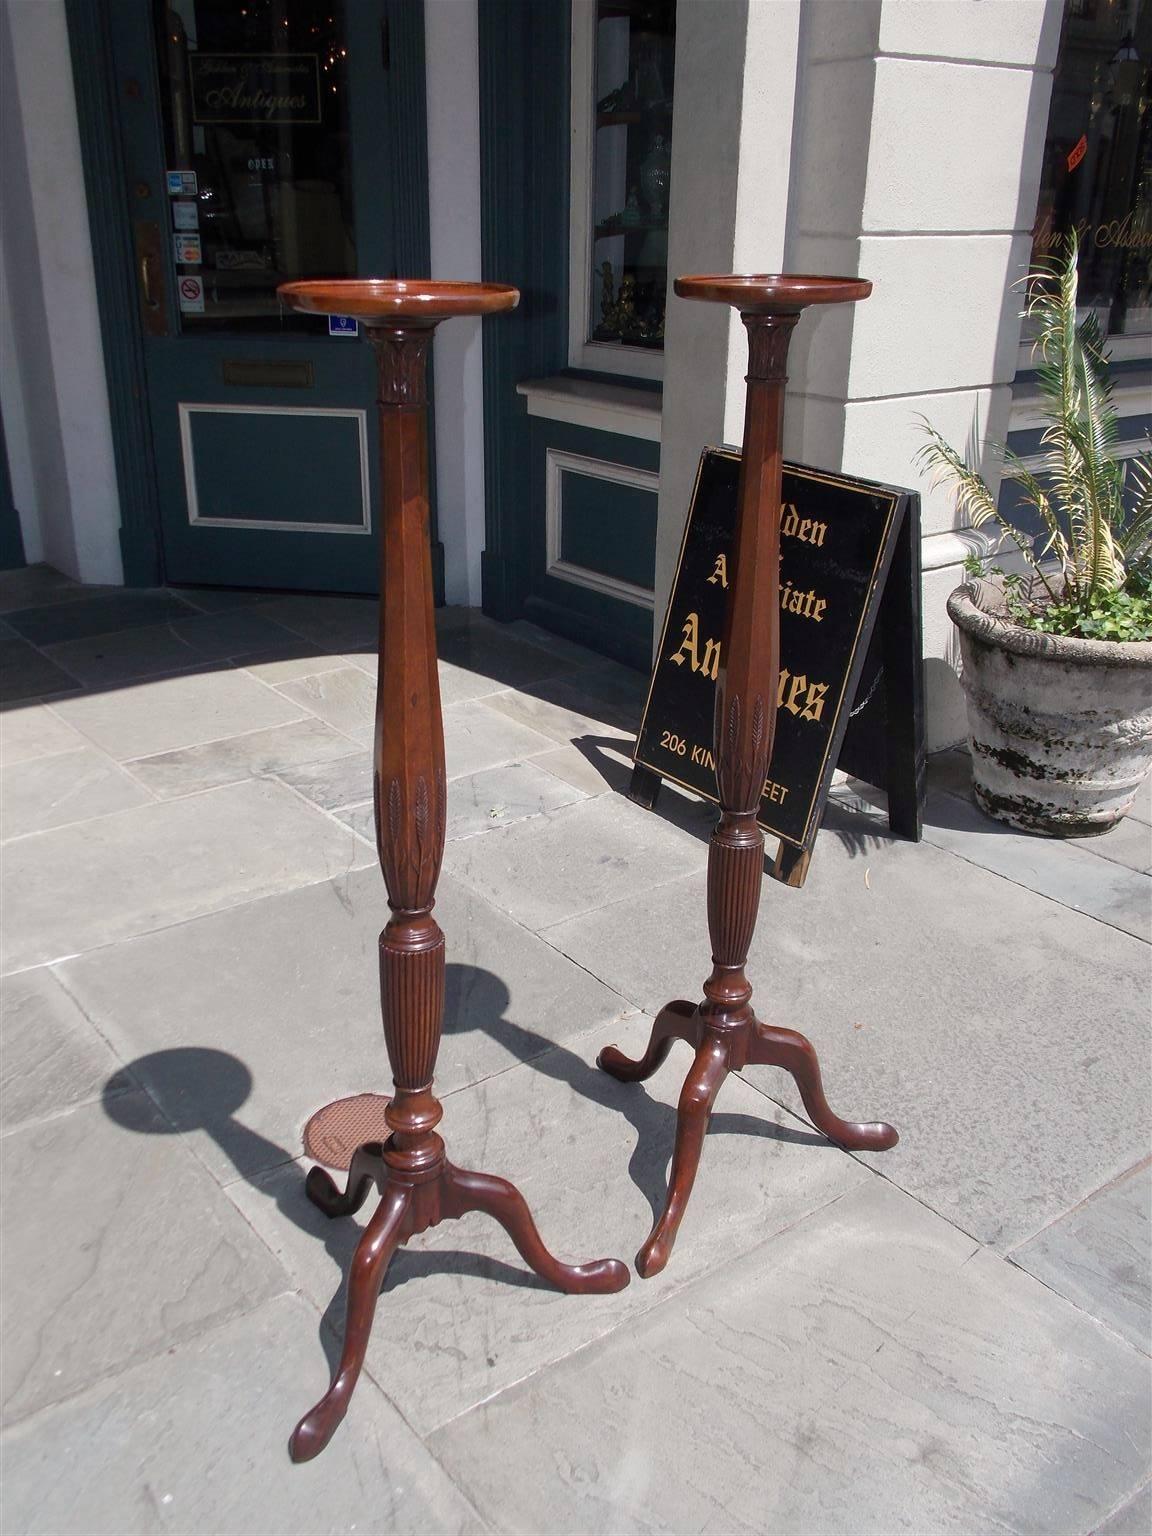 Pair of English Chippendale mahogany torchiers with circular molded edge dish tops, decorative carved acanthus and wheat motif, reeded bulbous ringed vase columns and terminating on the original tripod legs with slipper feet. Torchiers retain the